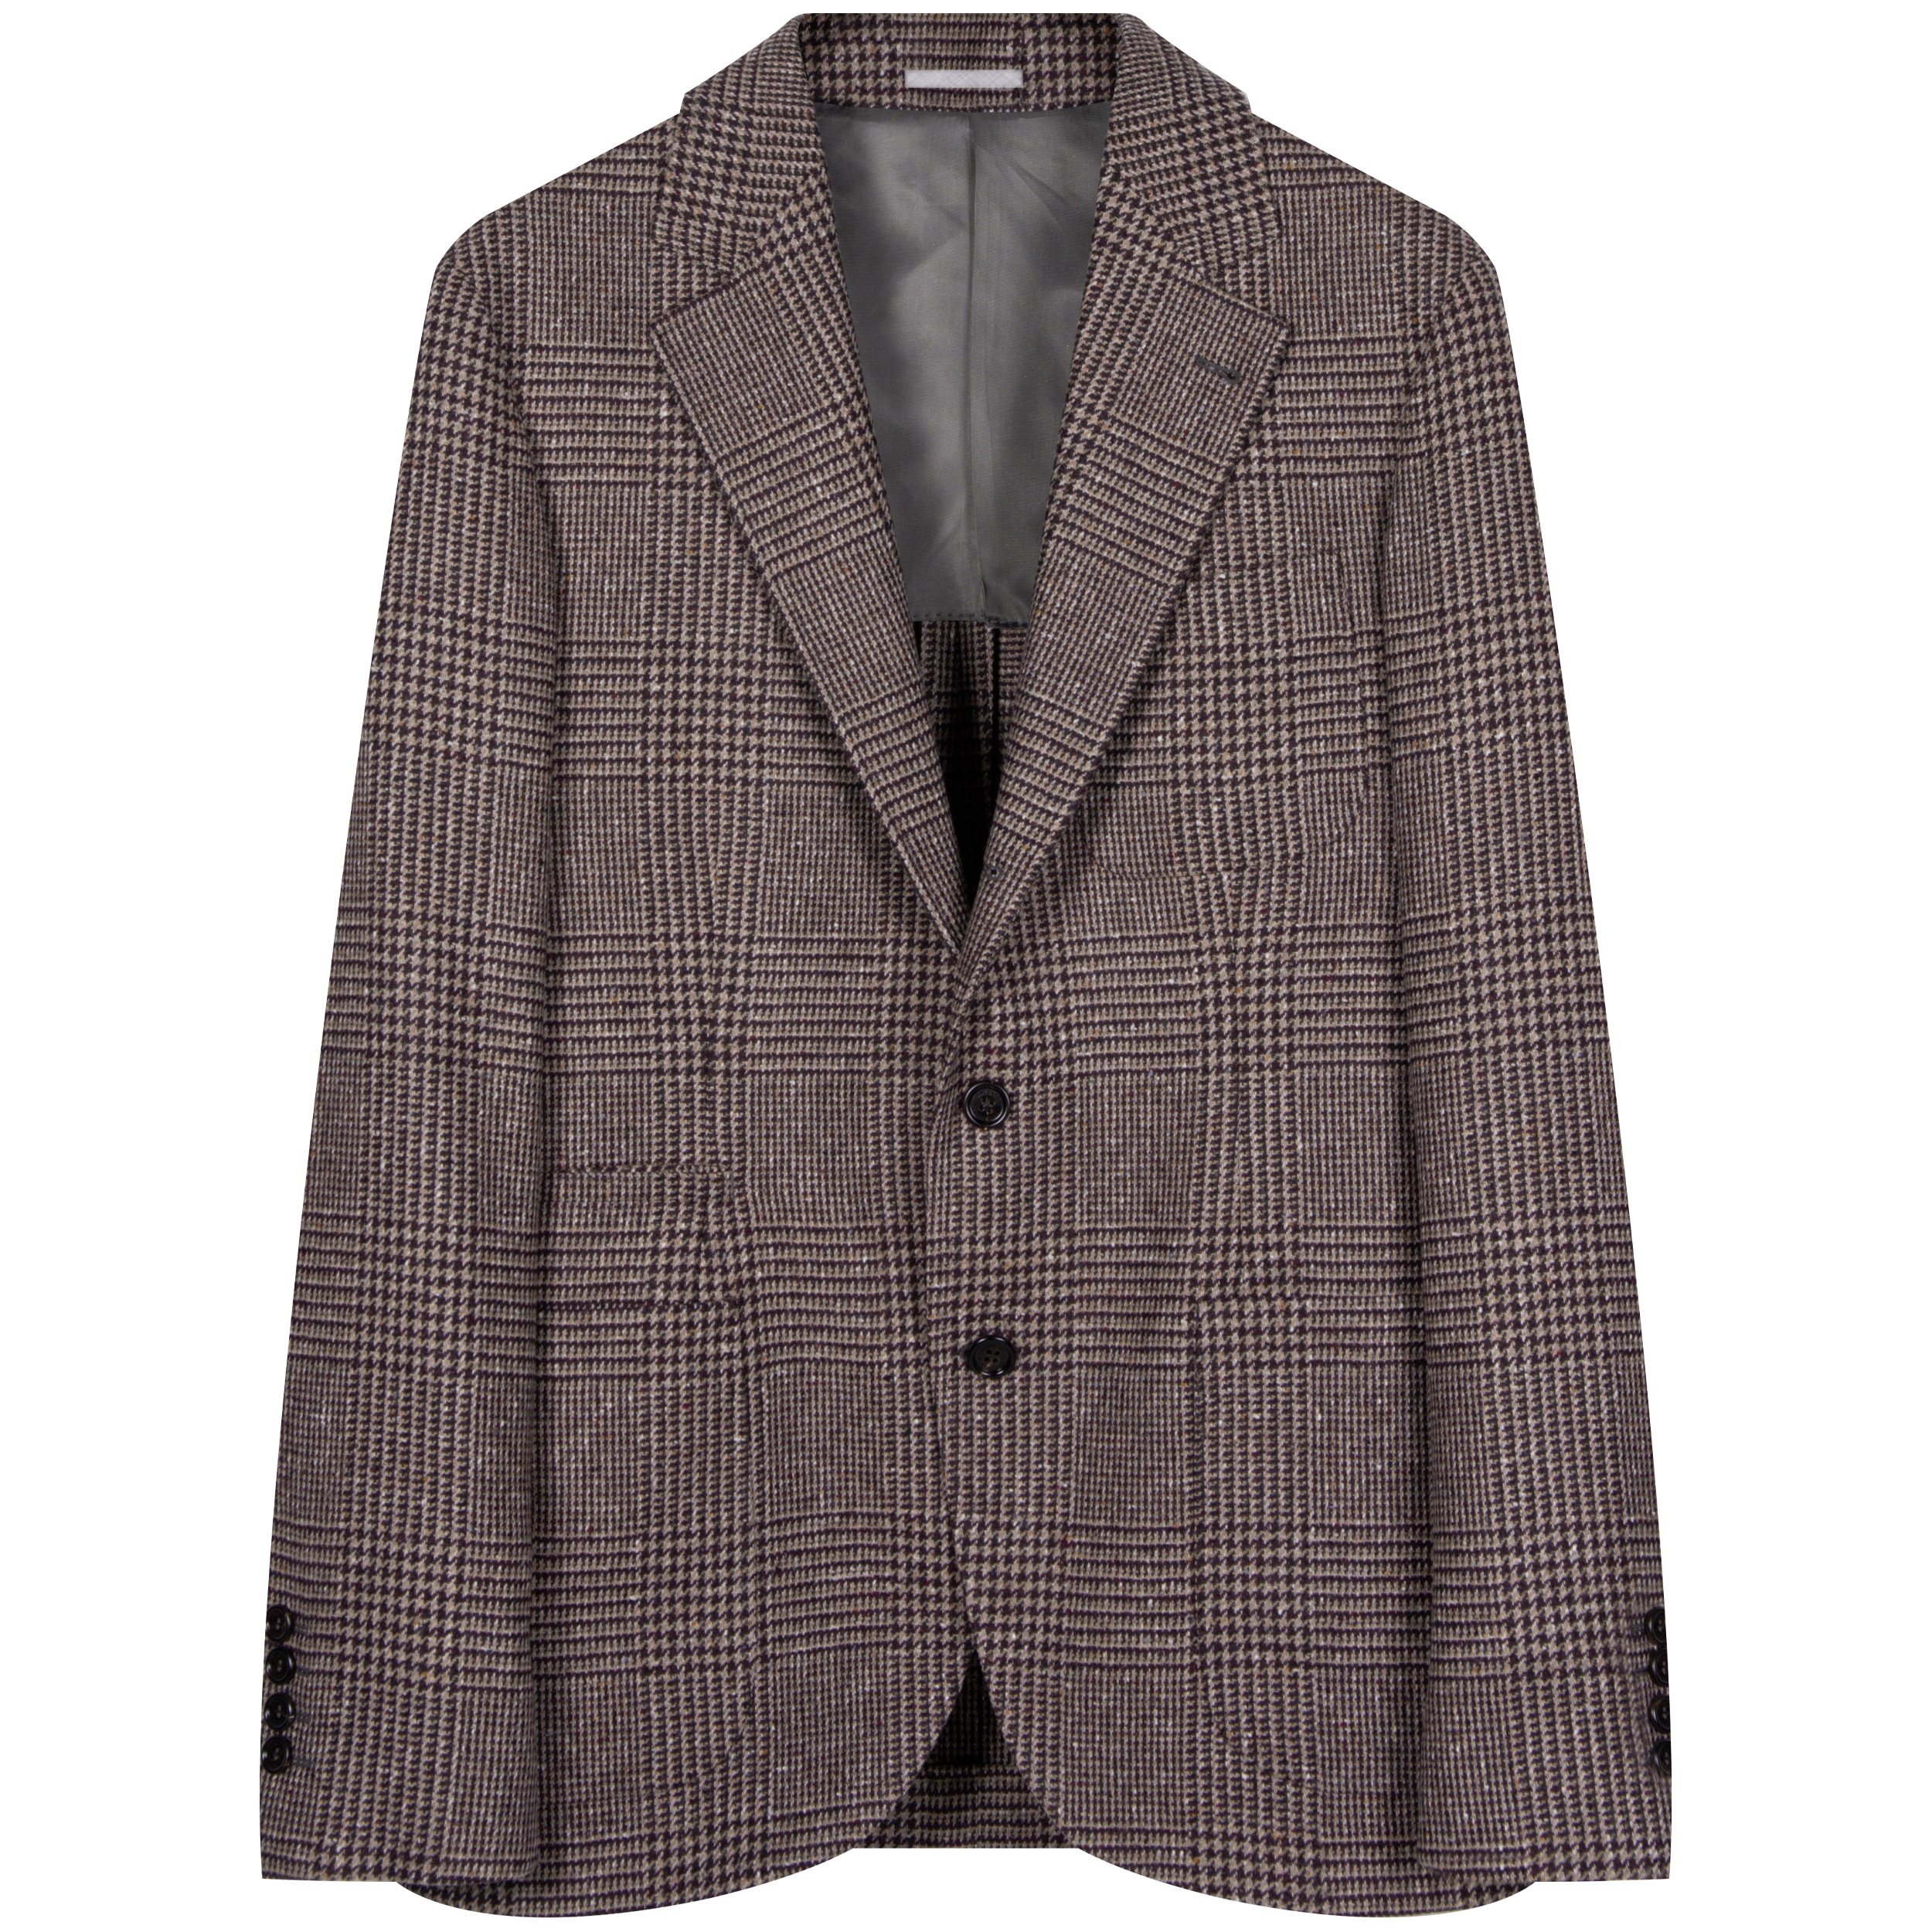 BRUNELLO CUCINELLI ’Prince Of Wales’ Check Unstructured Tailored Jacket Brown